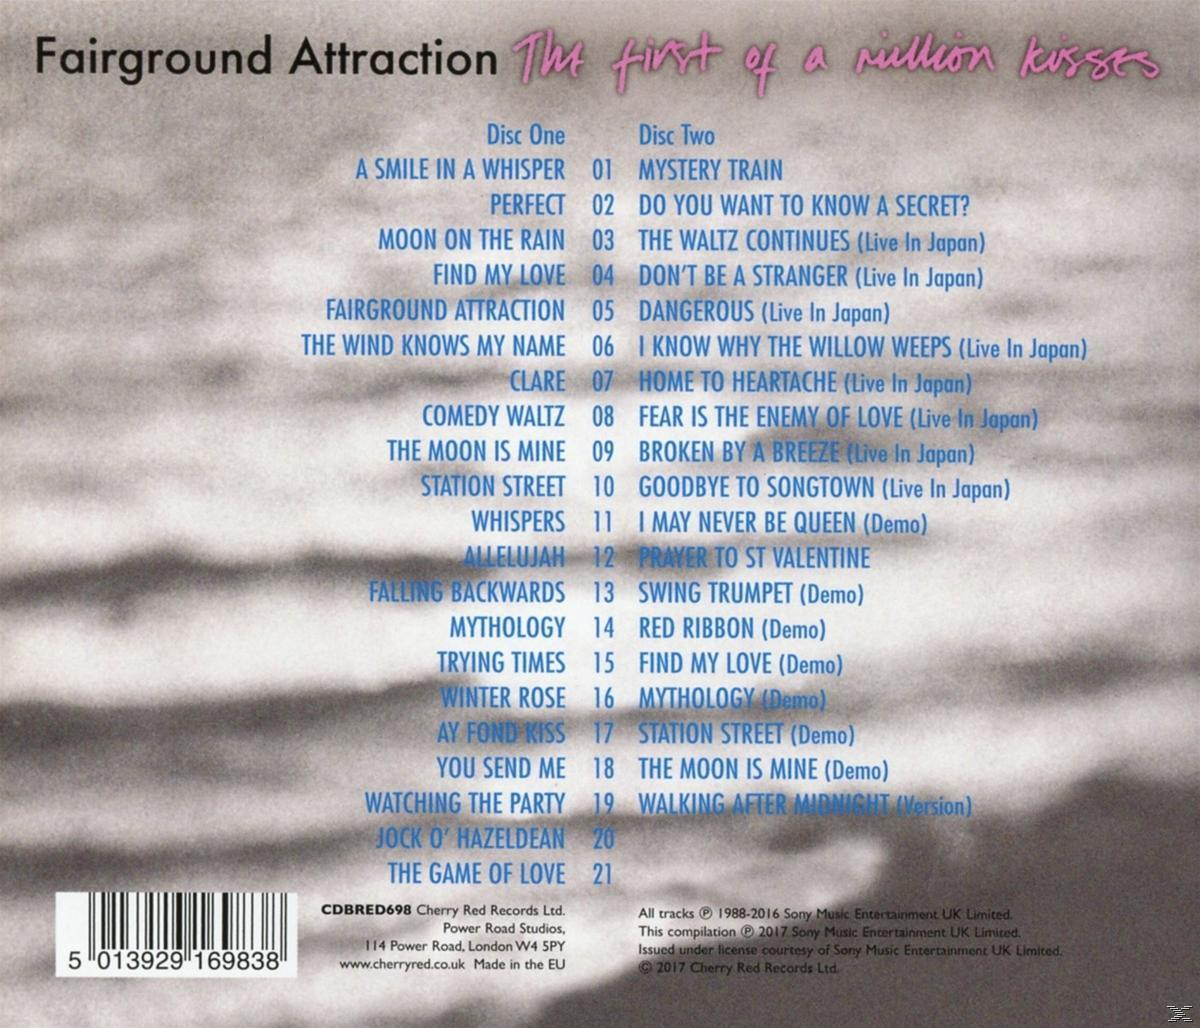 Fairground Attraction - The First Of (CD) Million Kisses-plus - B-Sides,Demos A